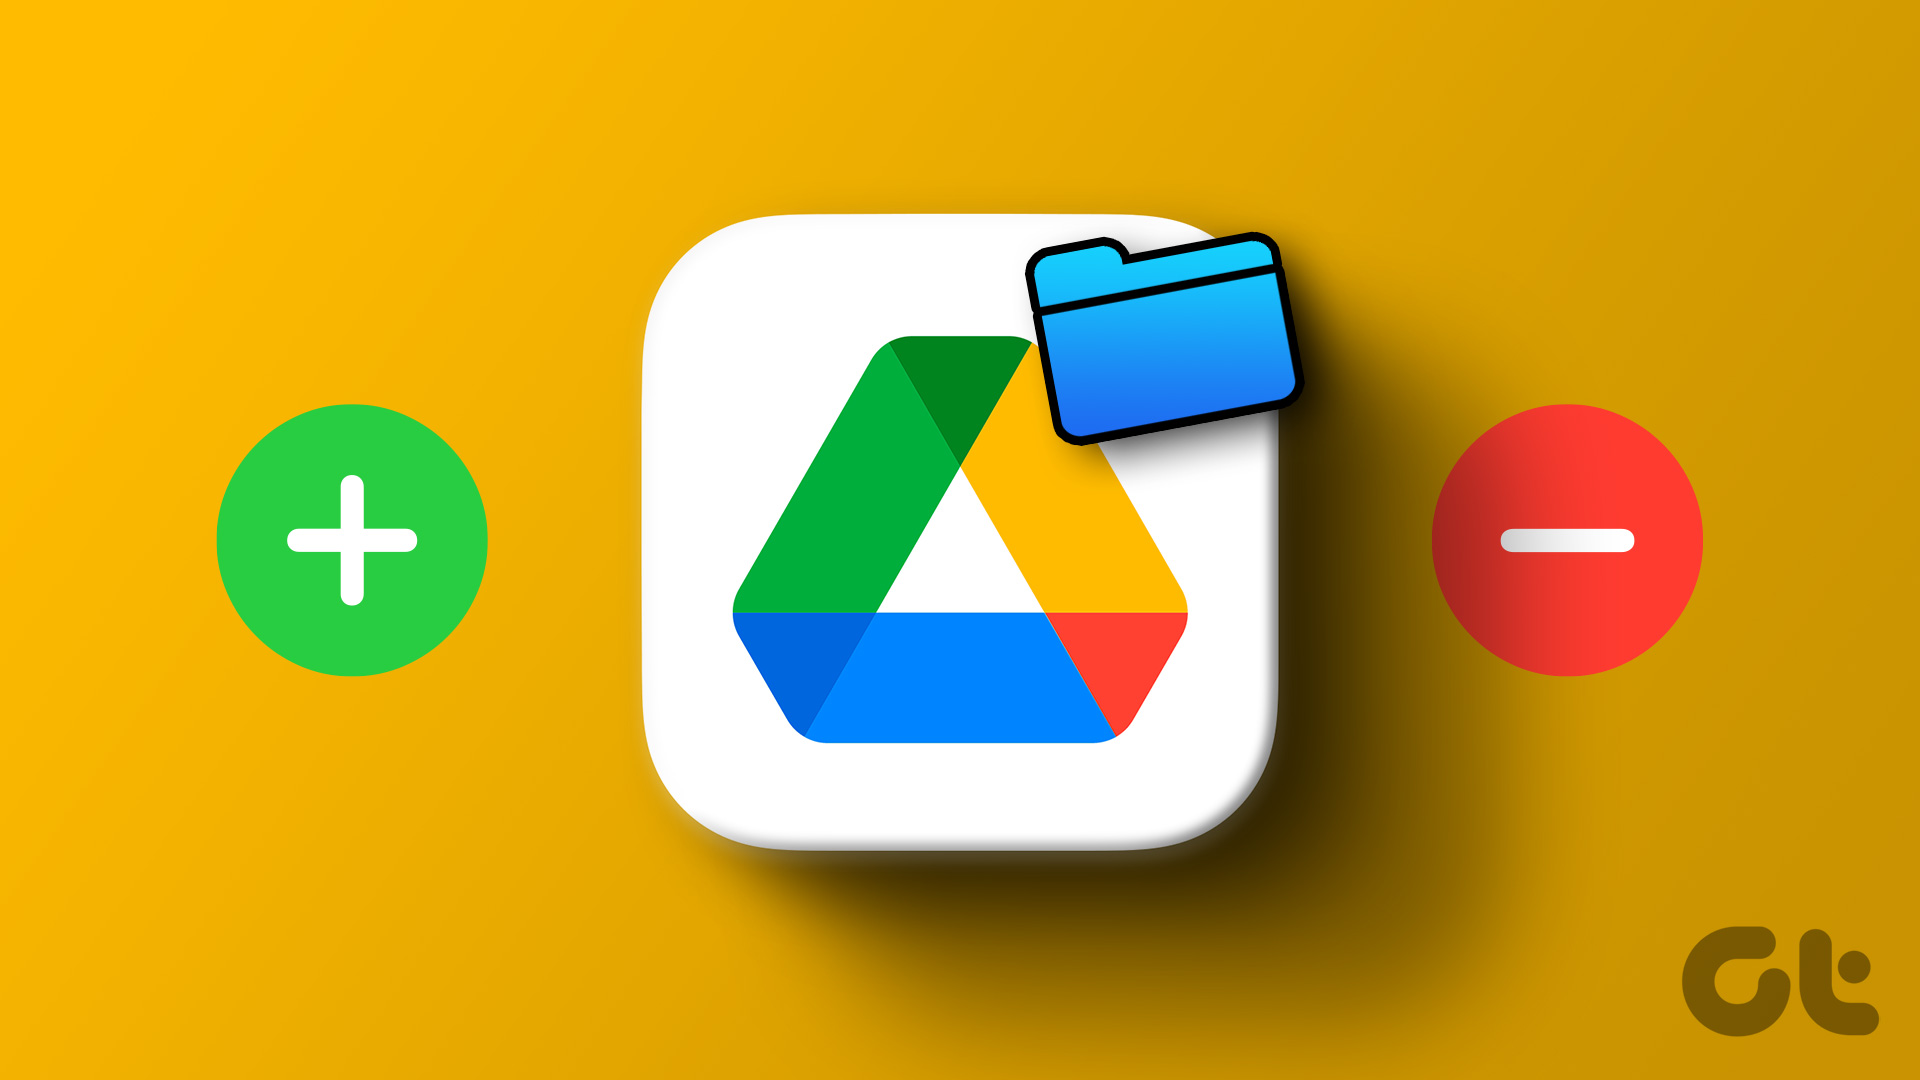 How to Add and Remove Google Drive From Files App on iPhone - Guiding Tech